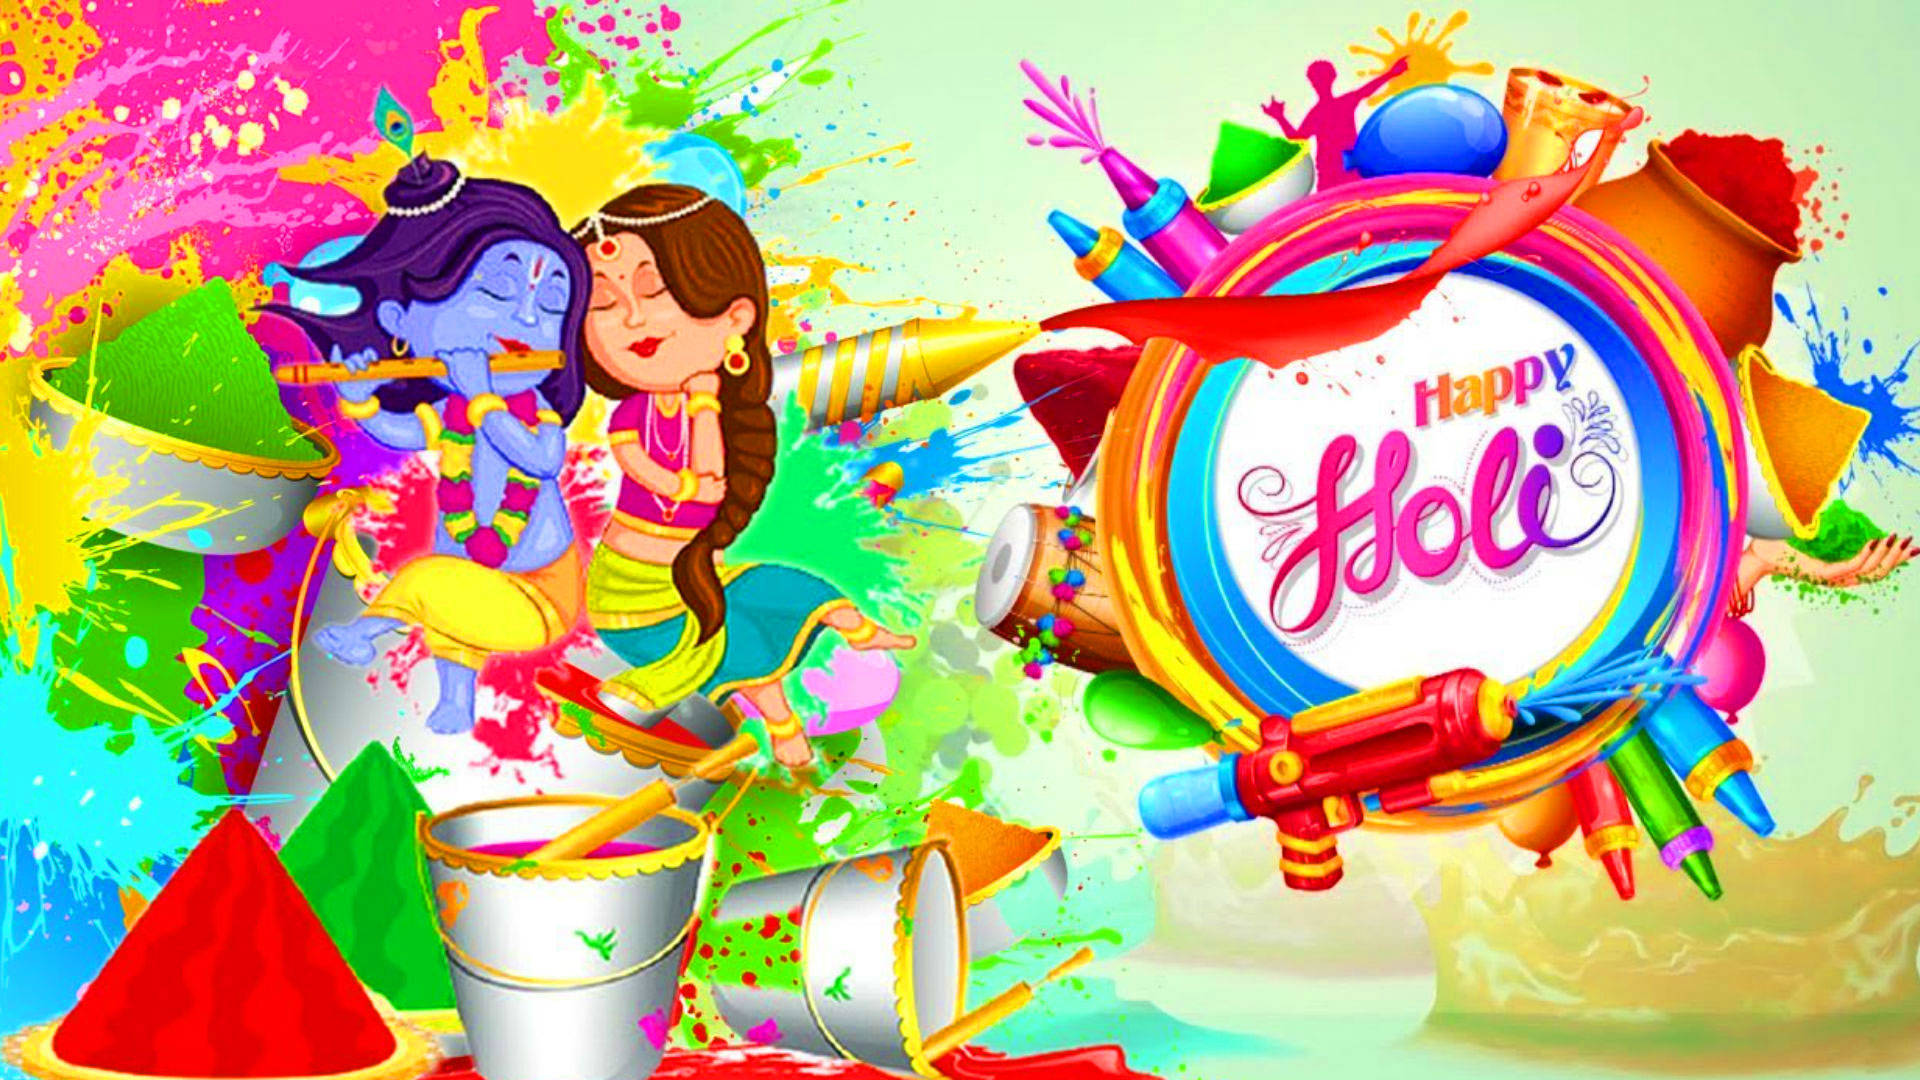 Celebrate The Festival Of Colors With Vibrancy - Happy Holi Hd Wallpaper